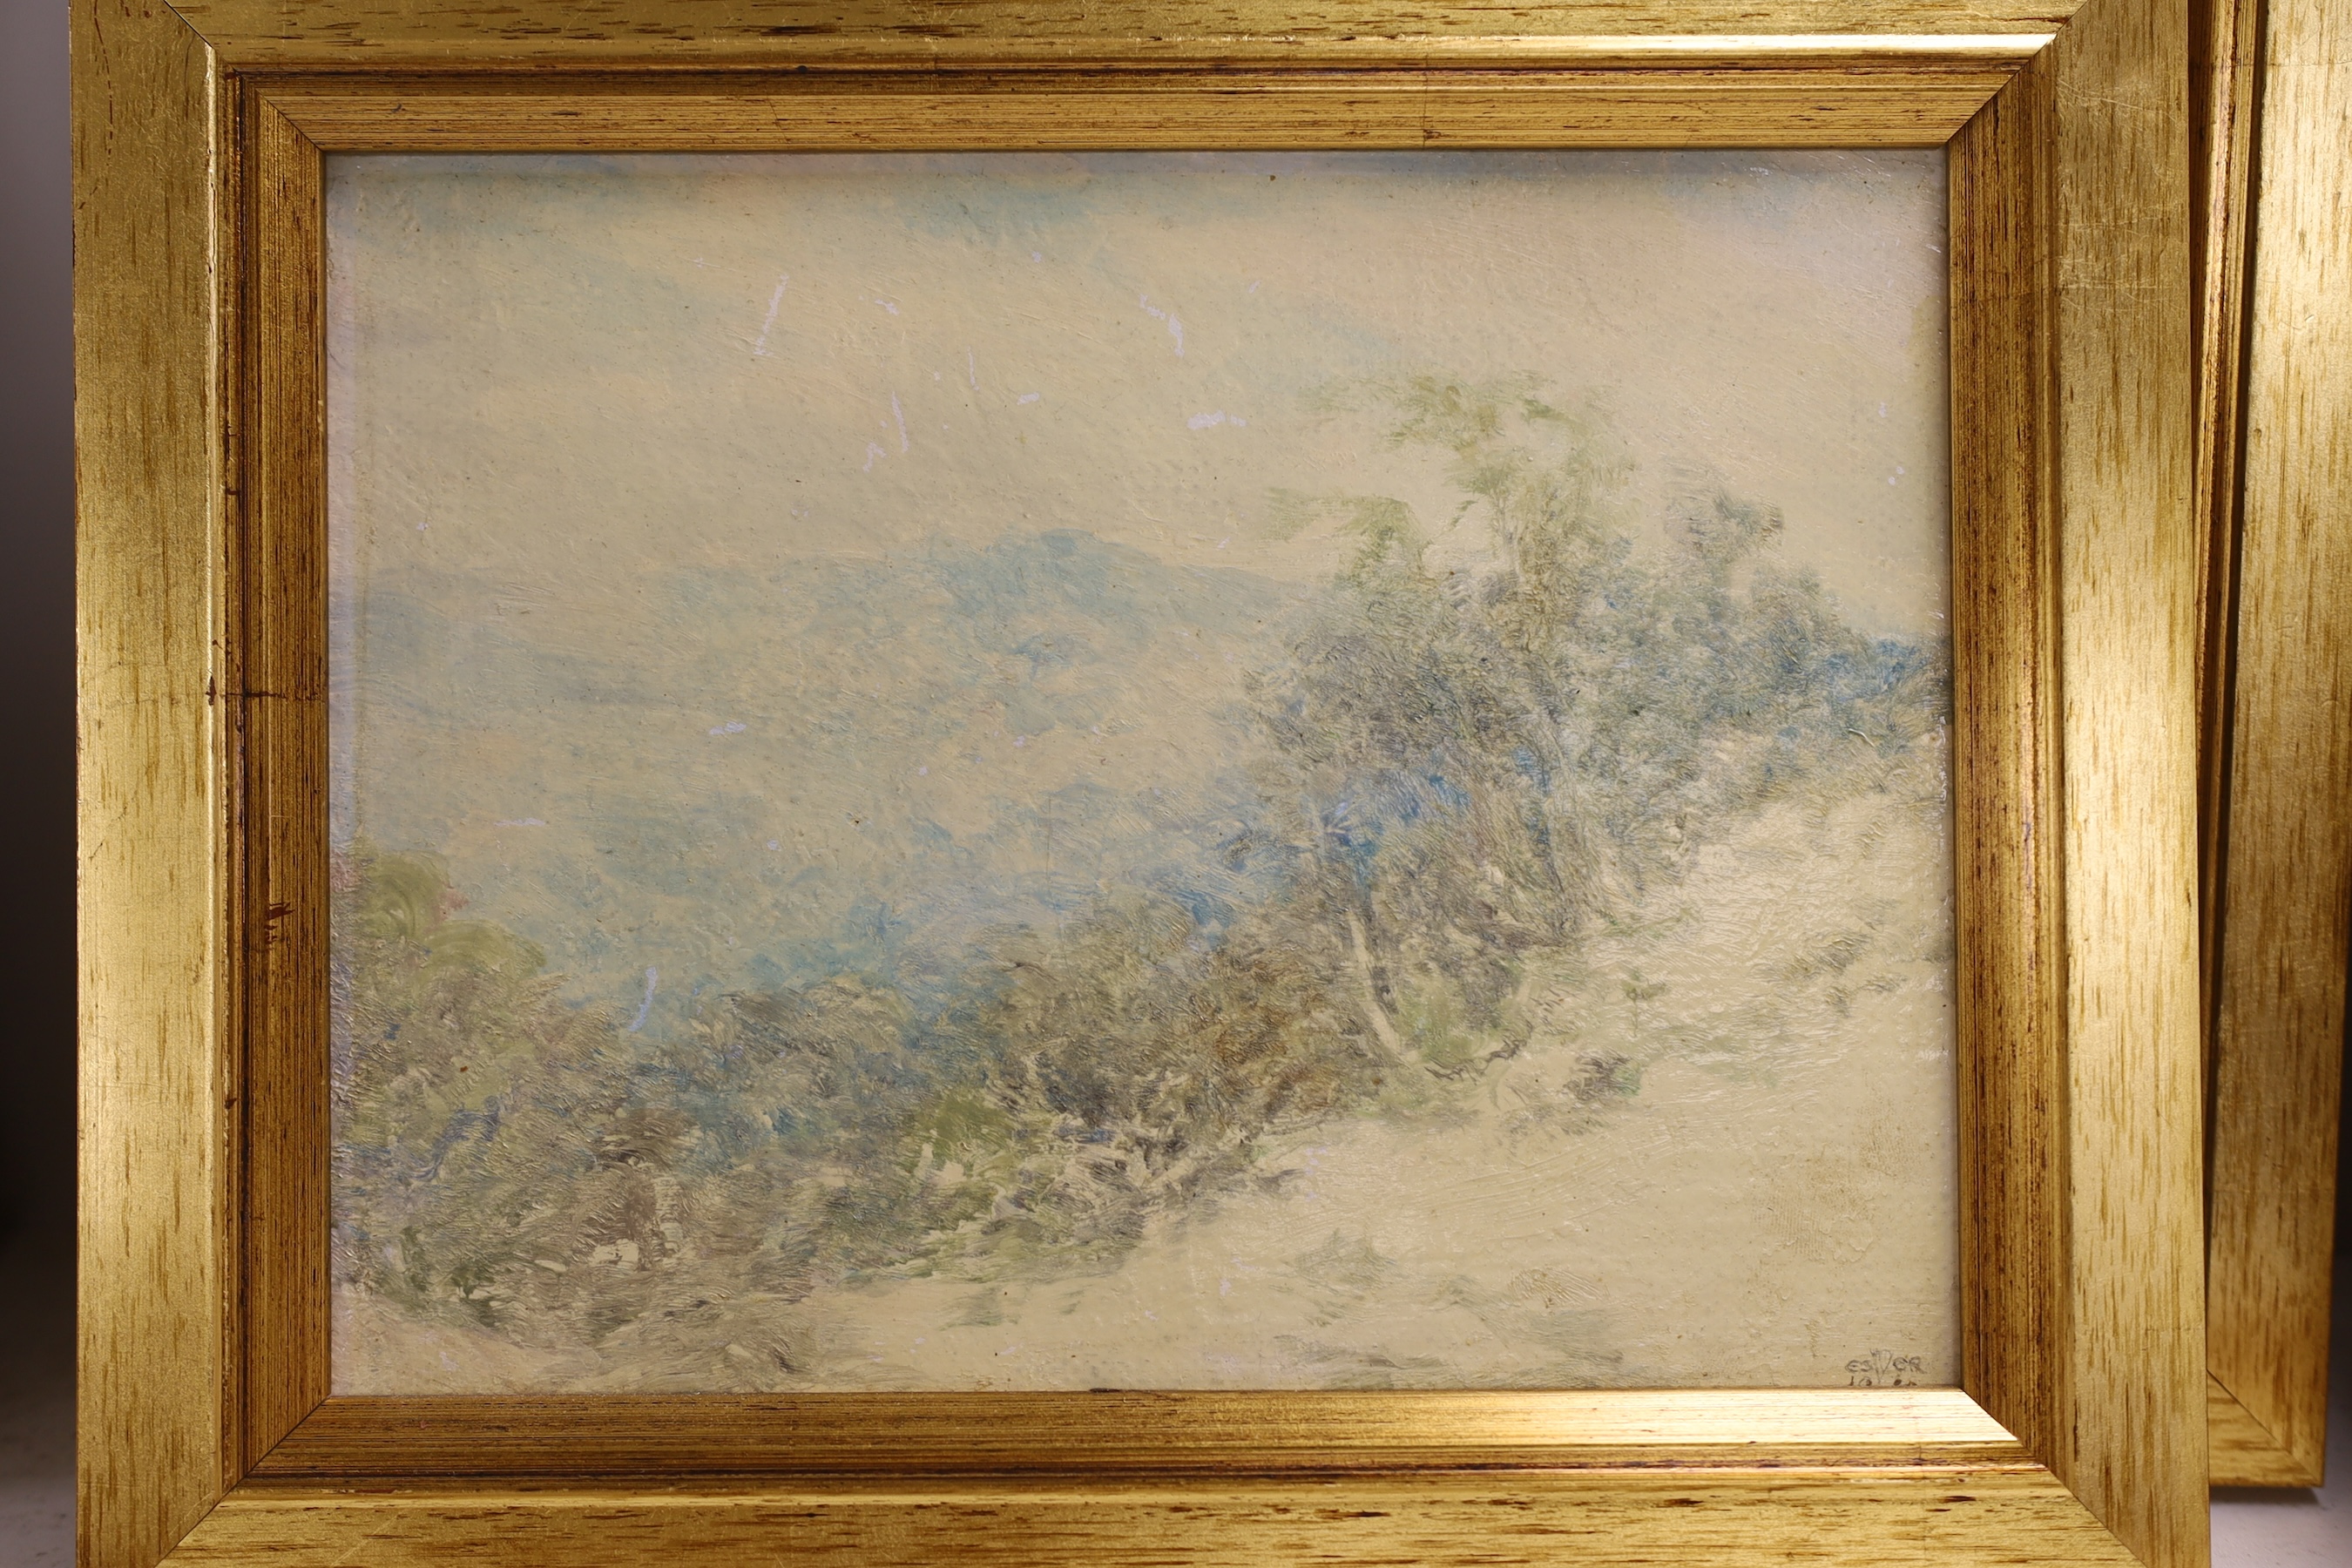 Edward Steel Harper (1878-1951), two oils on board, Landscapes including ‘A Winter Morning’, signed with monogram and dated 1919, one with ink inscription verso, 17 x 22cm and 24 x 19cm. Condition - poor to fair, surface